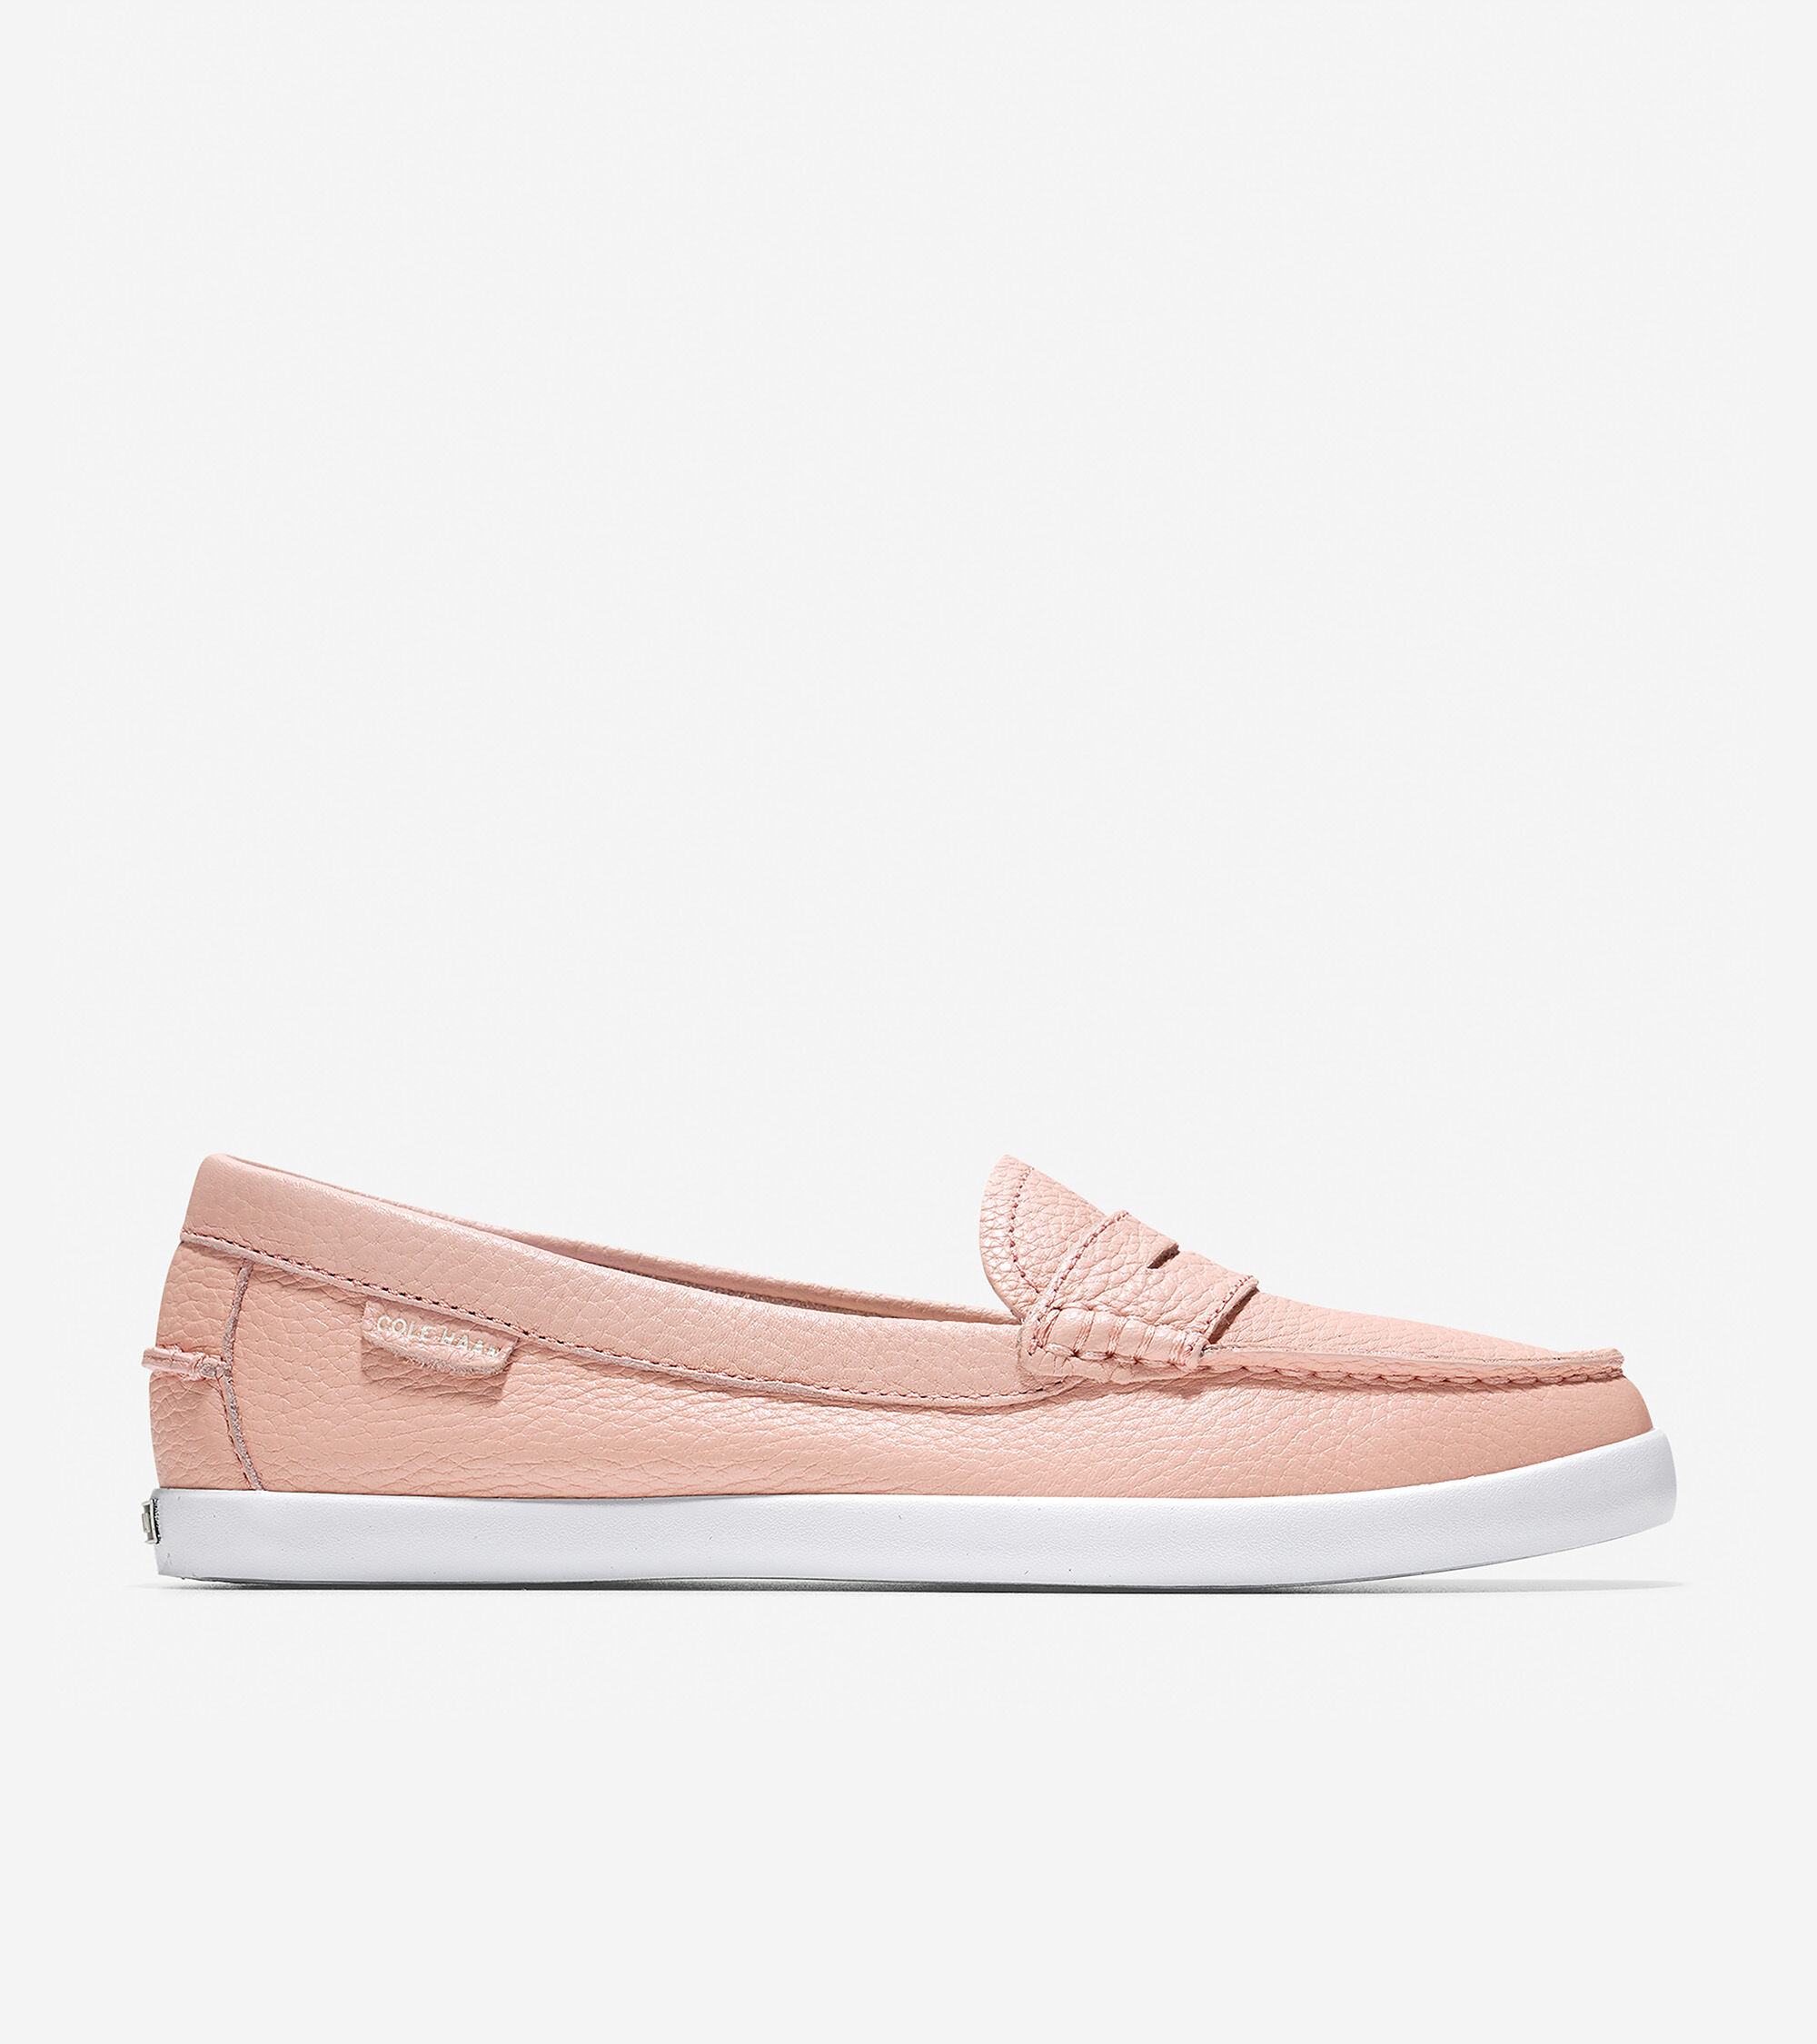 cole haan women's pinch penny loafer